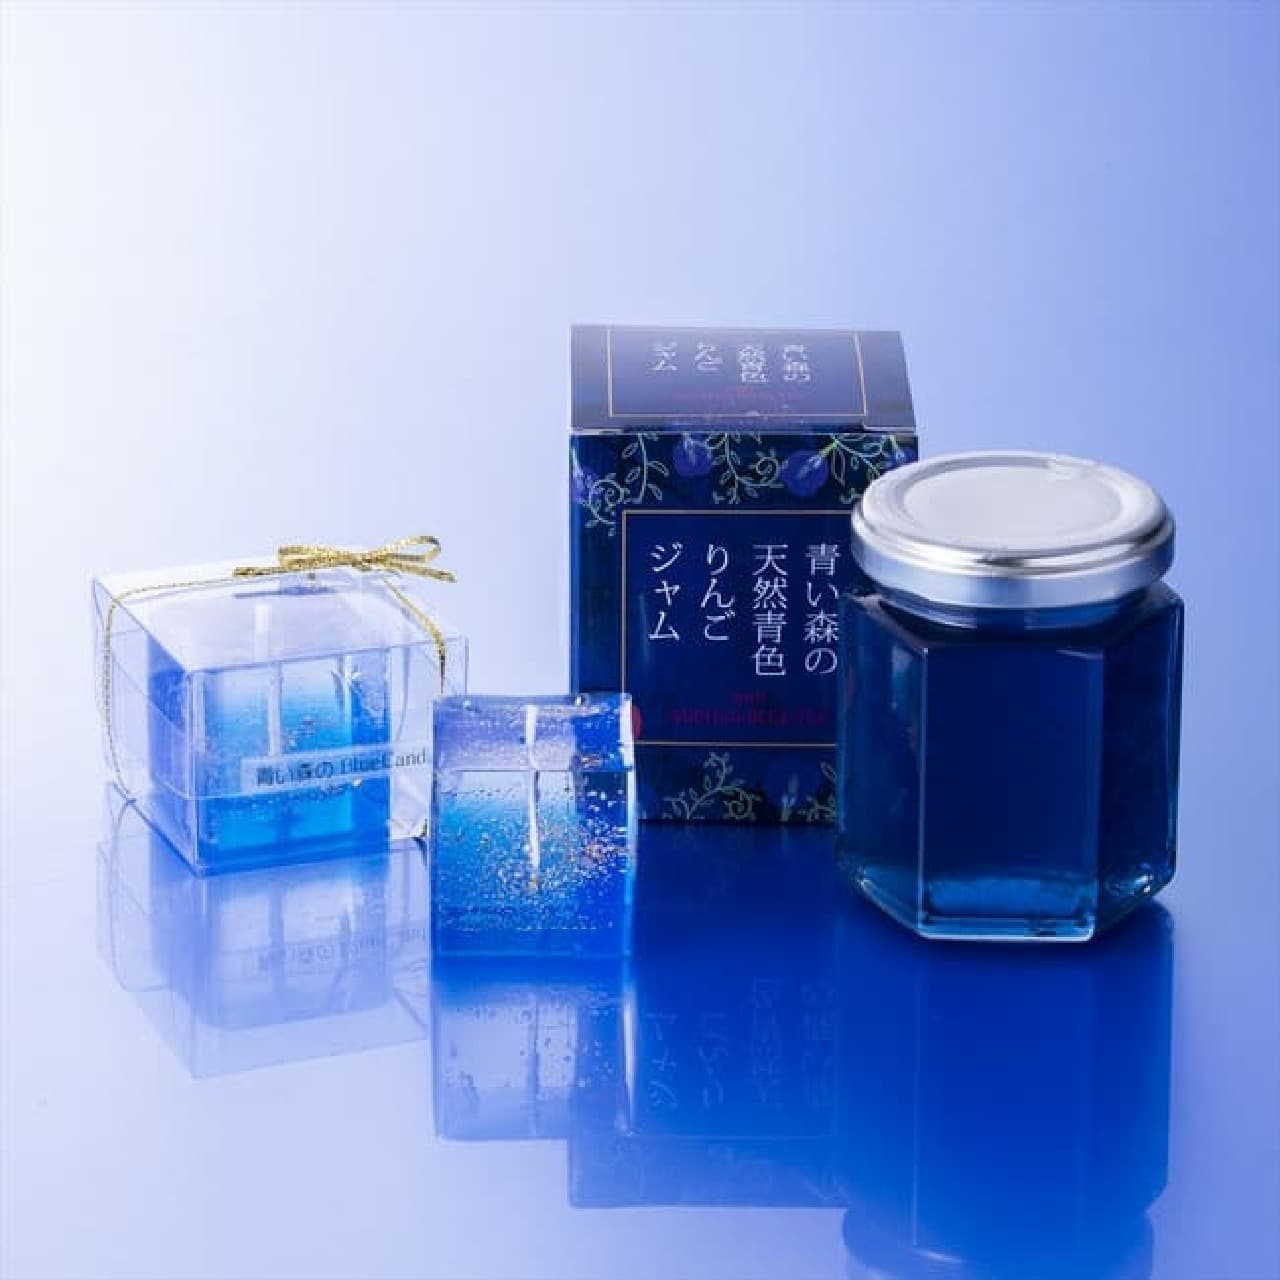 Blue Forest Blue Candle & Natural Blue Apple Jam Set --Beautiful shades are popular! For Christmas and gifts